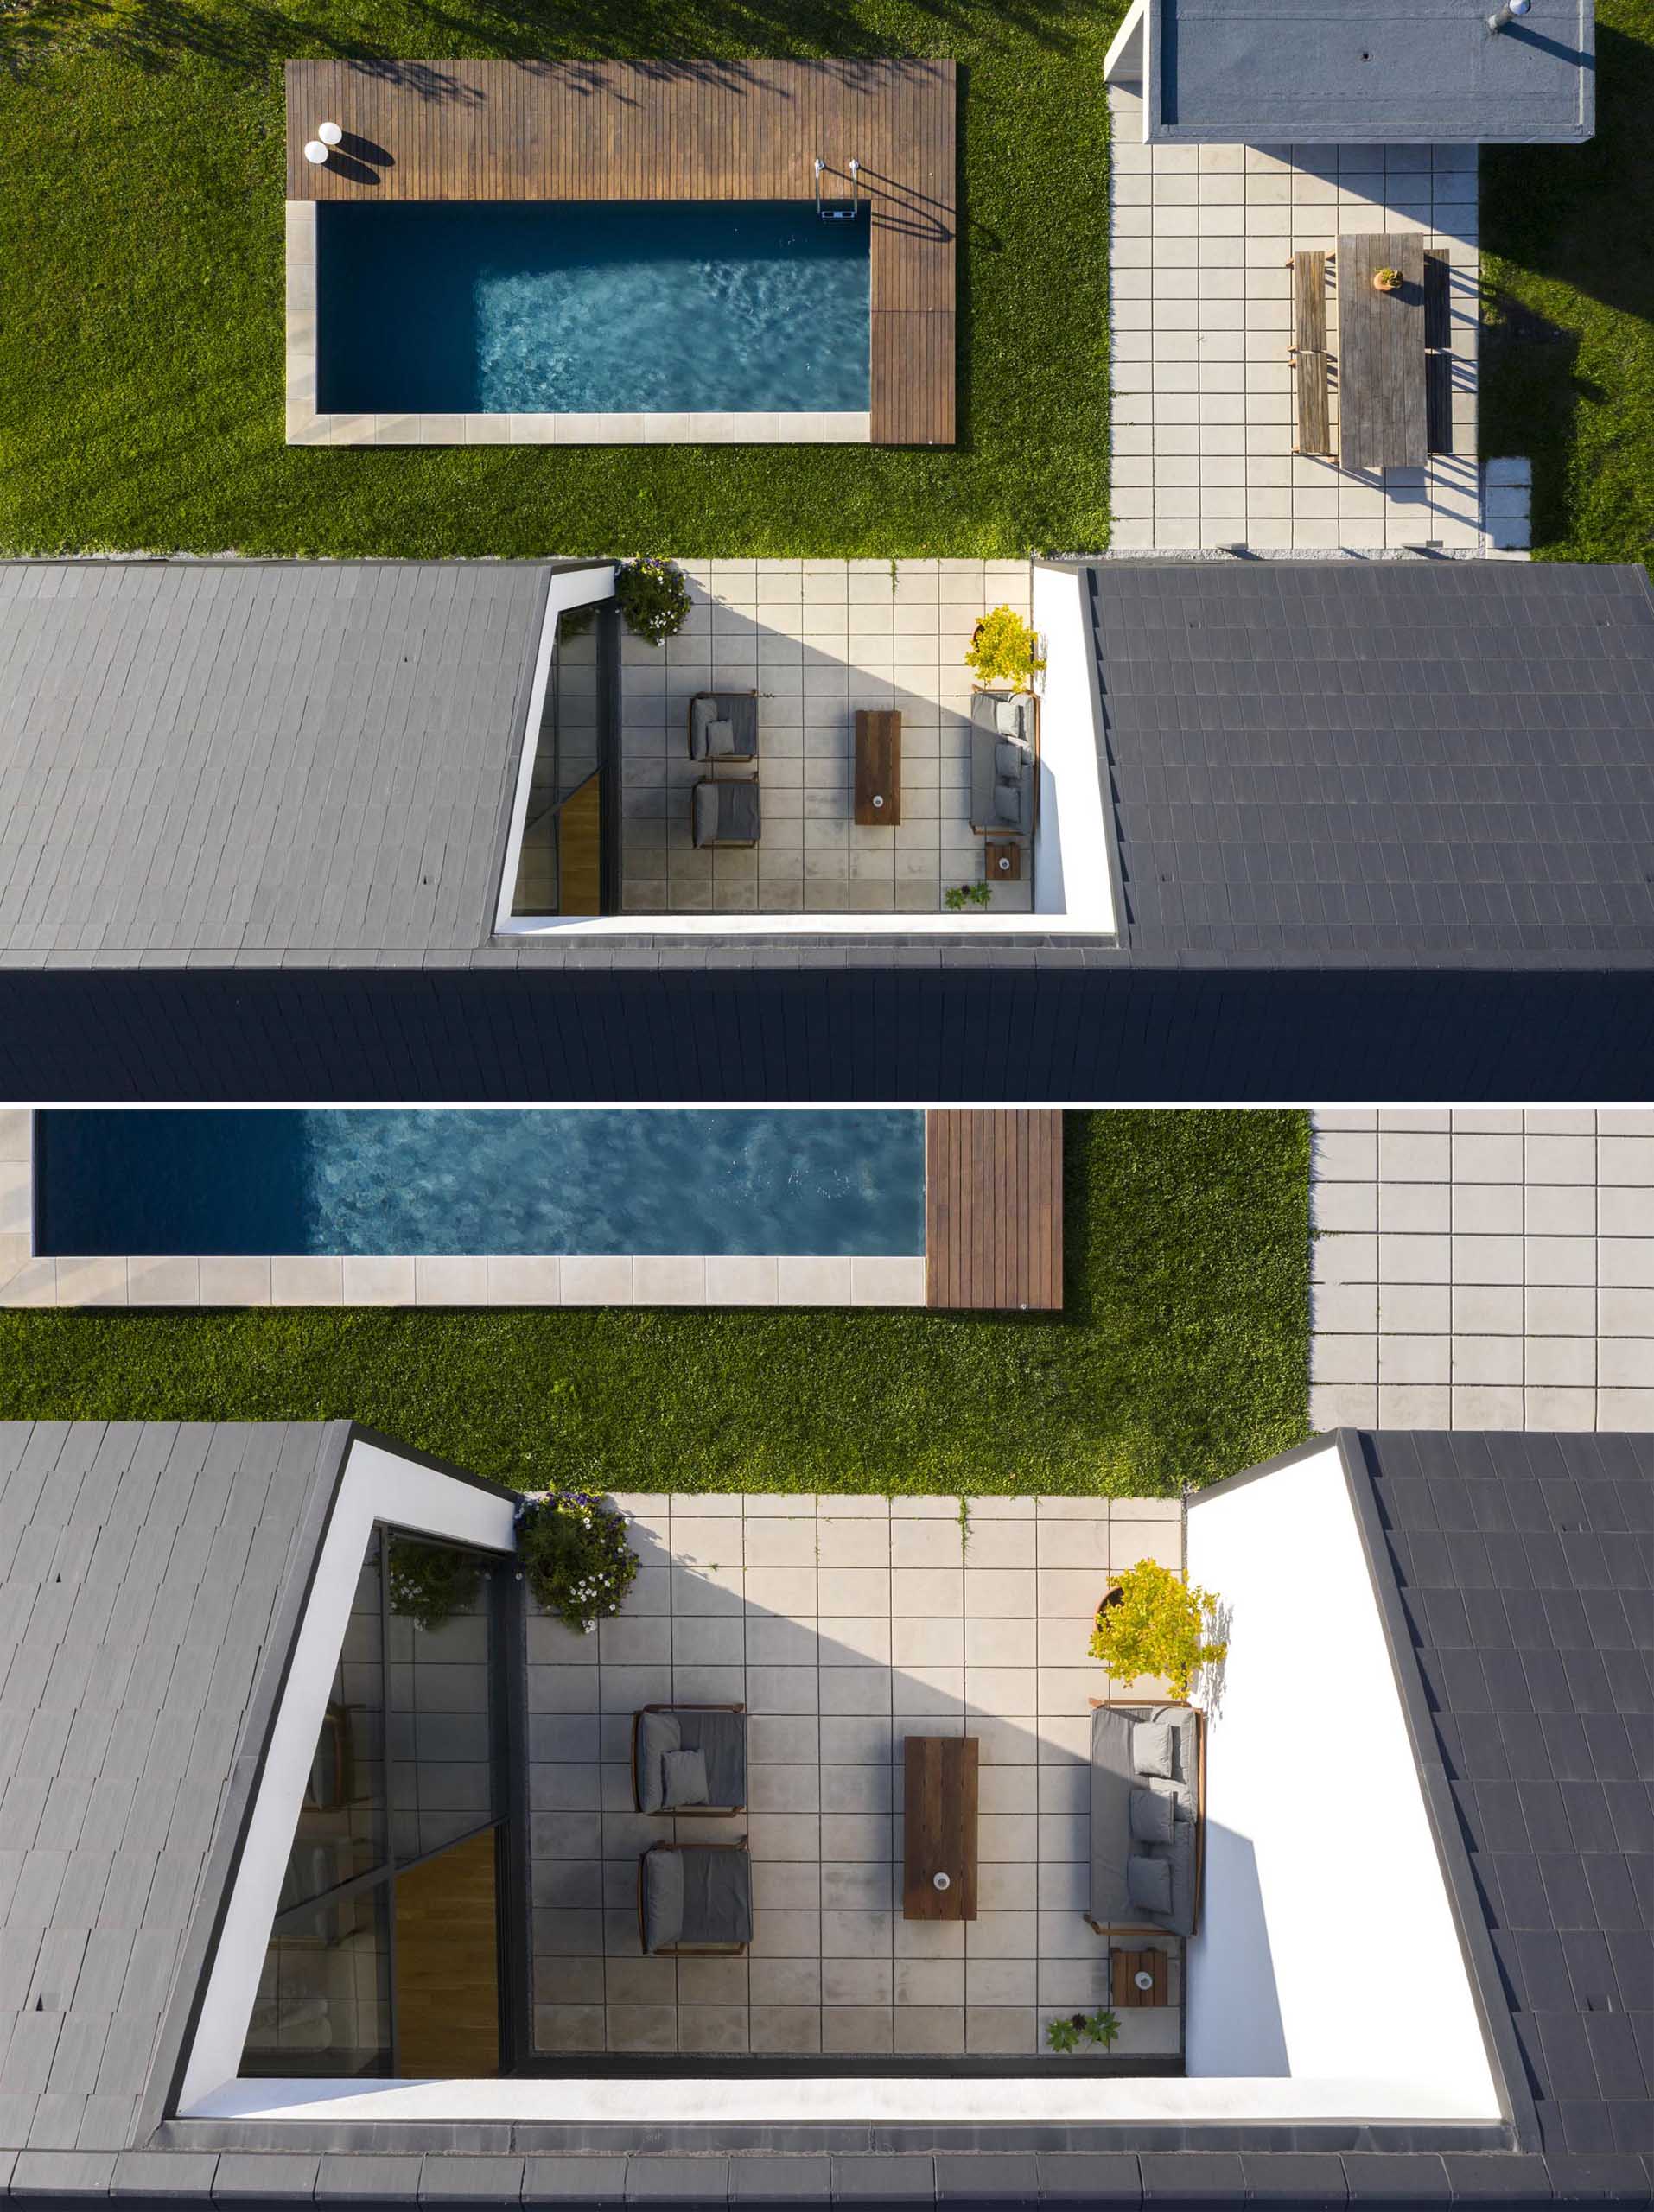 A modern house open to a small patio, the yard, and a swimming pool.